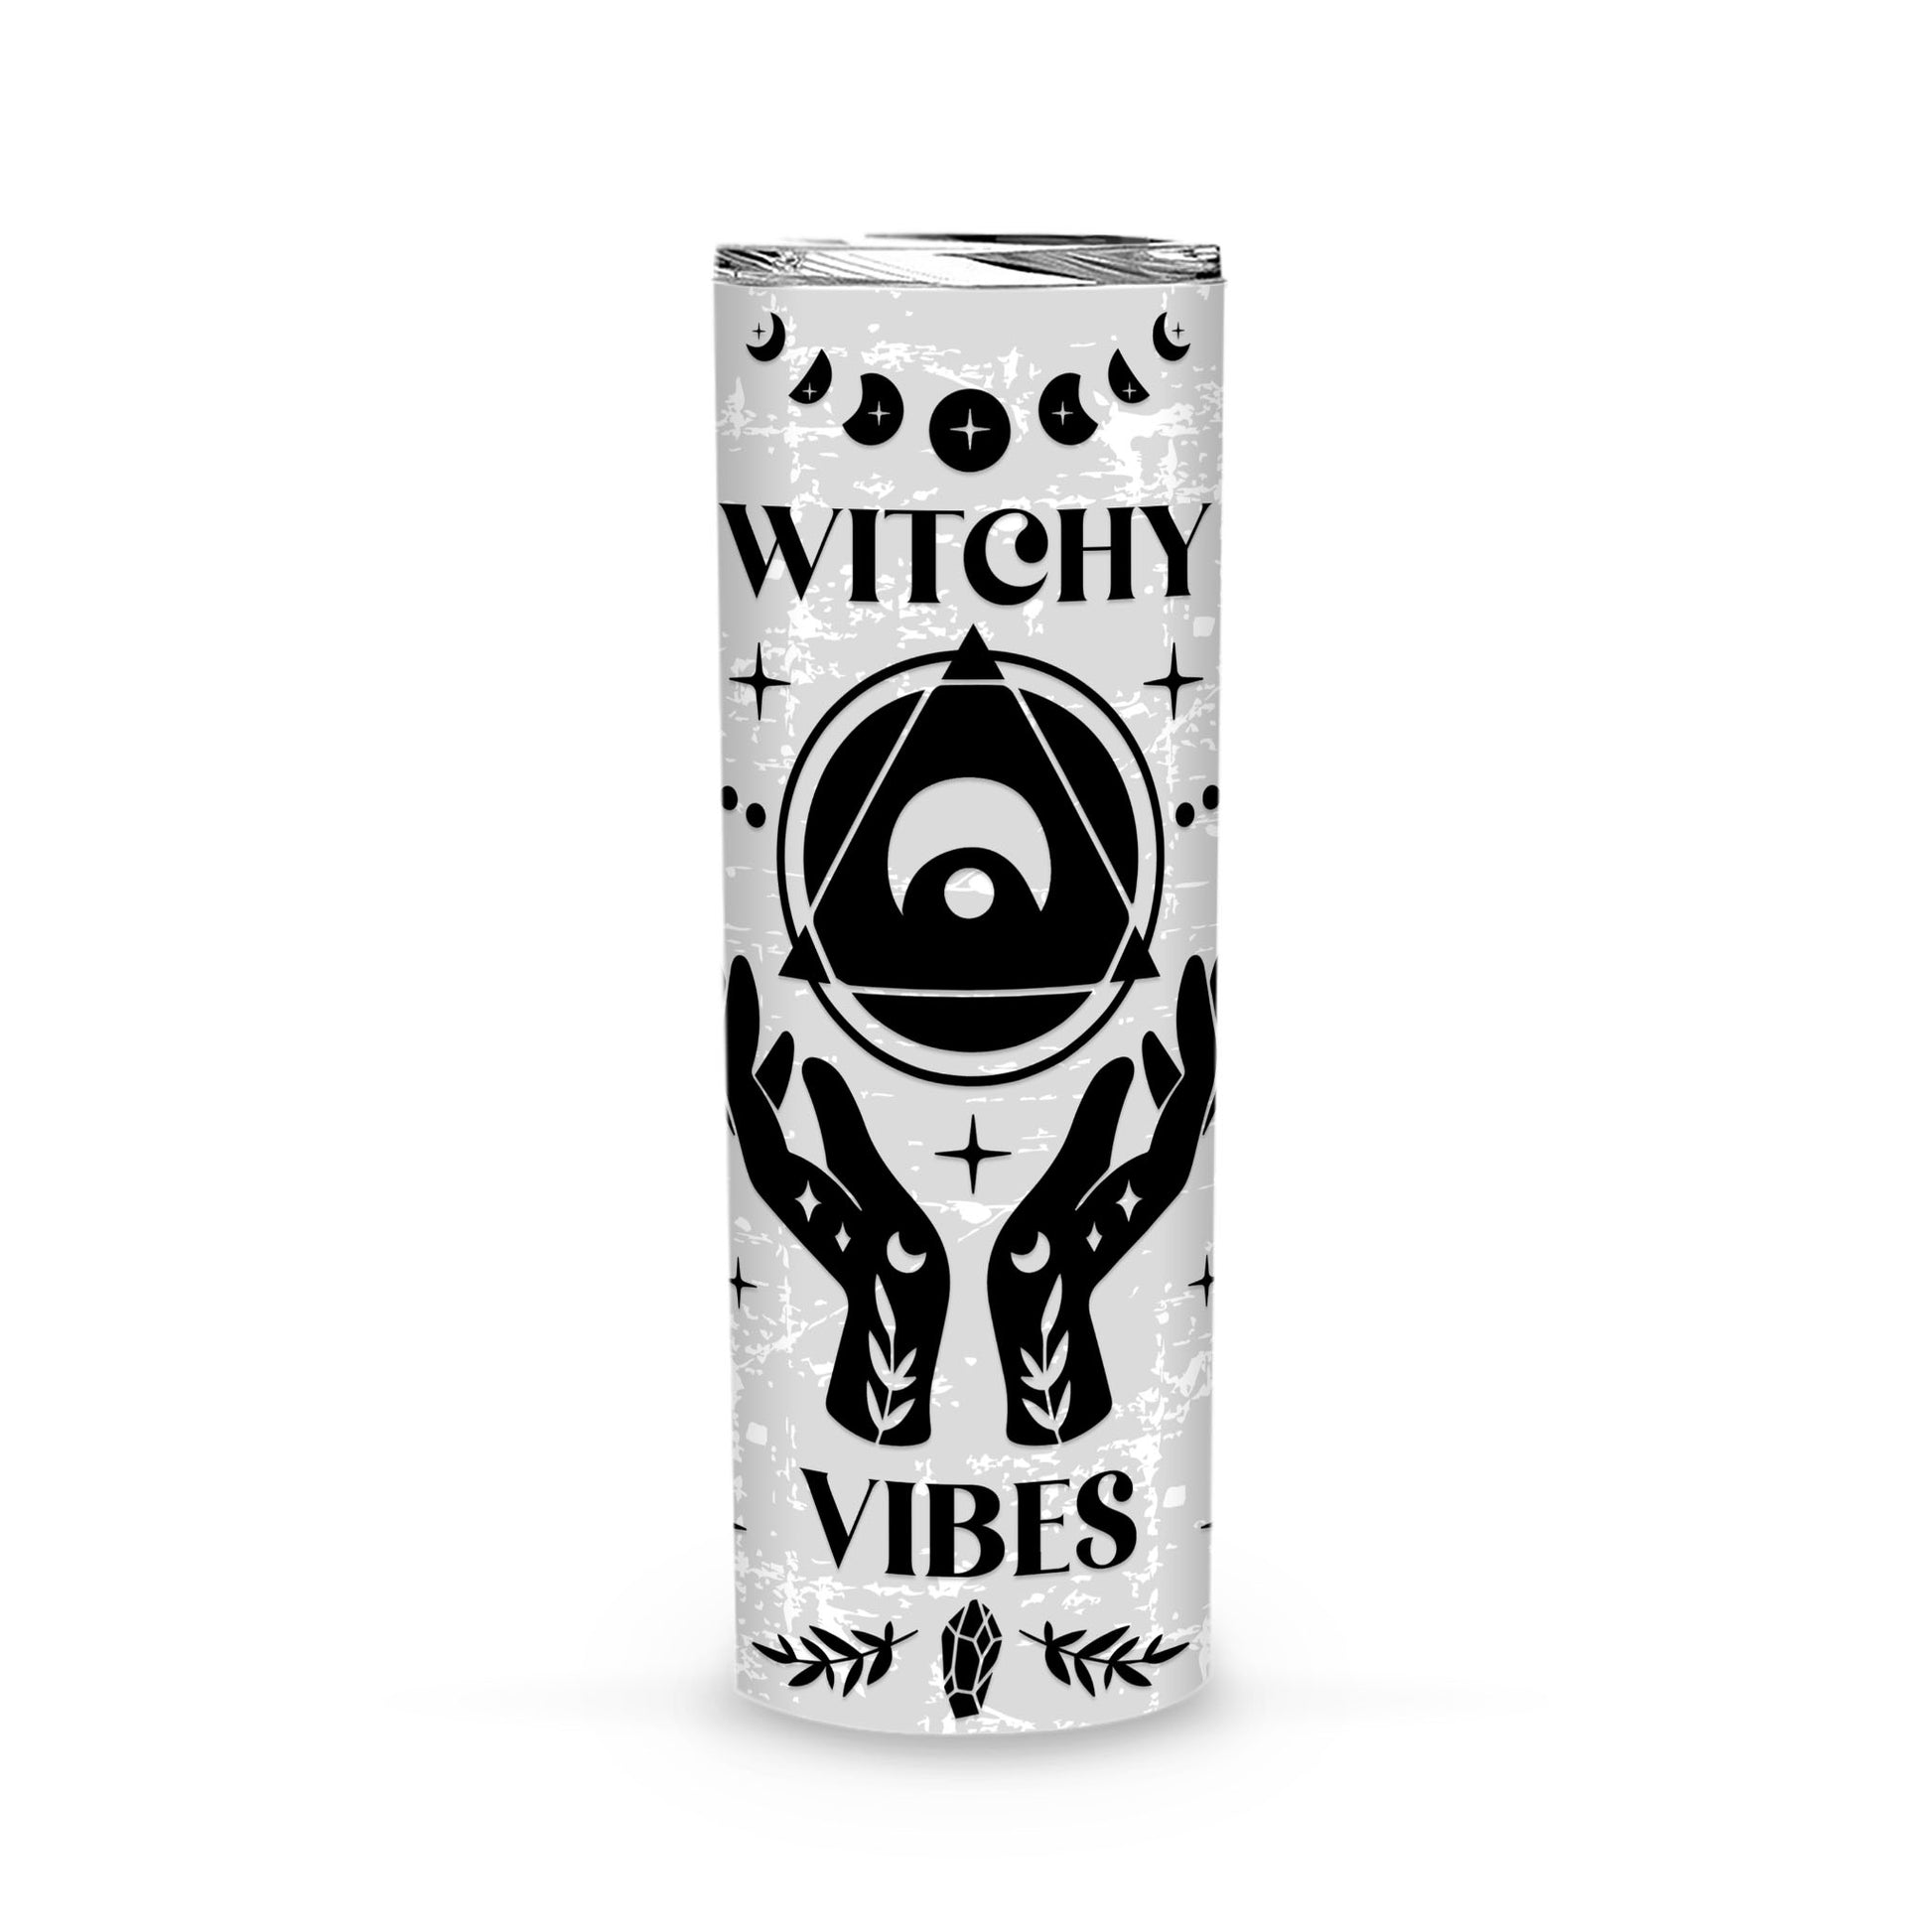 Witchy vibes - Witch Tumbler-MoonChildWorld